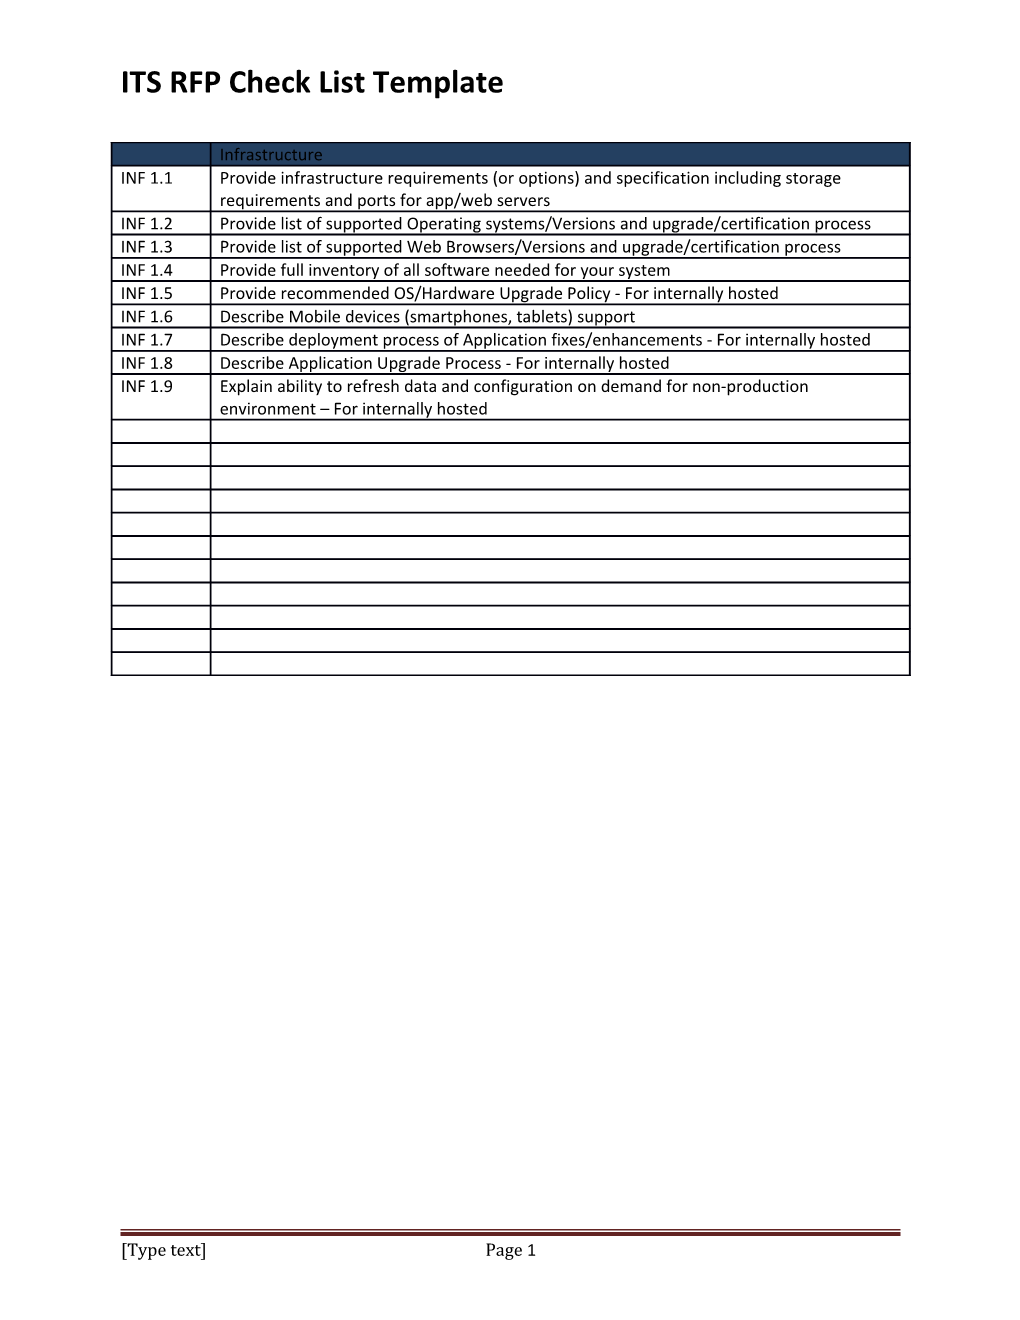 ITS RFP Check List Template